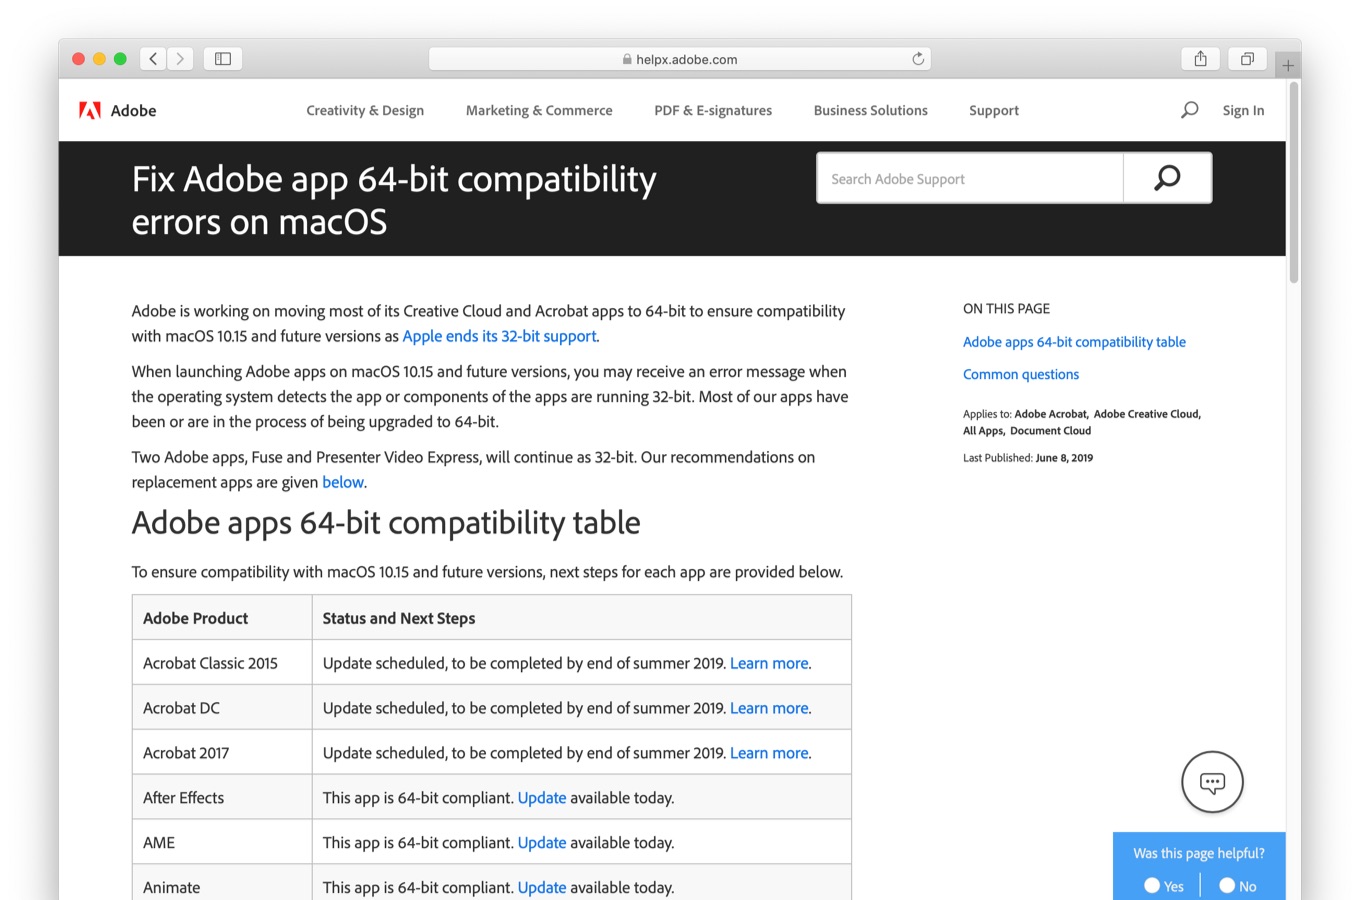 Adobe apps 64-bit compatibility table